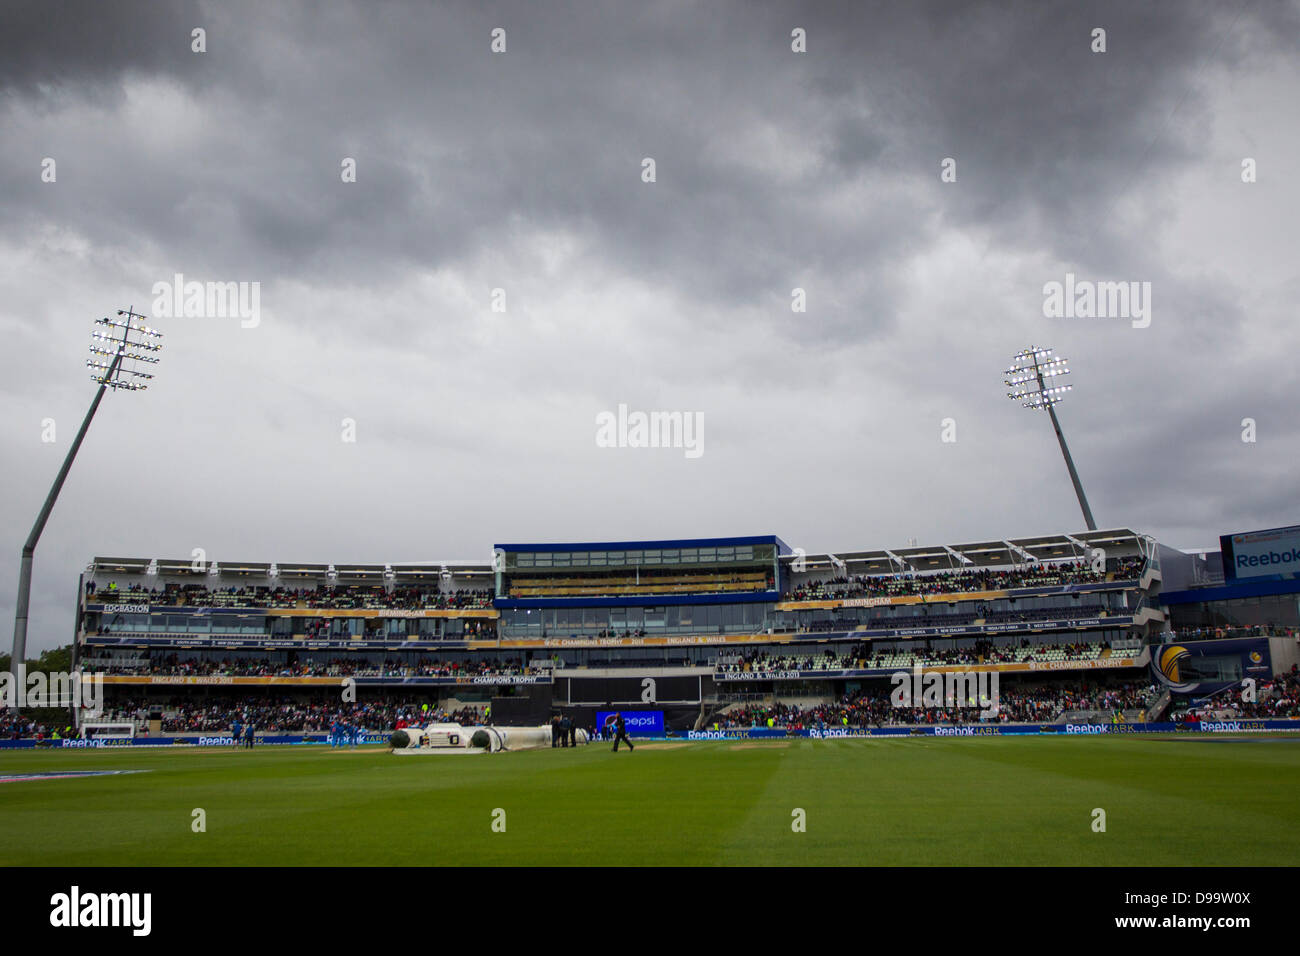 Edgbaston, UK. 15th June 2013. A general view of the ground during a rain break at the ICC Champions Trophy international cricket match between India and Pakistan at Edgbaston Cricket Ground on June 15, 2013 in Edgbaston, England. (Photo by Mitchell Gunn/ESPA/Alamy Live News) Stock Photo